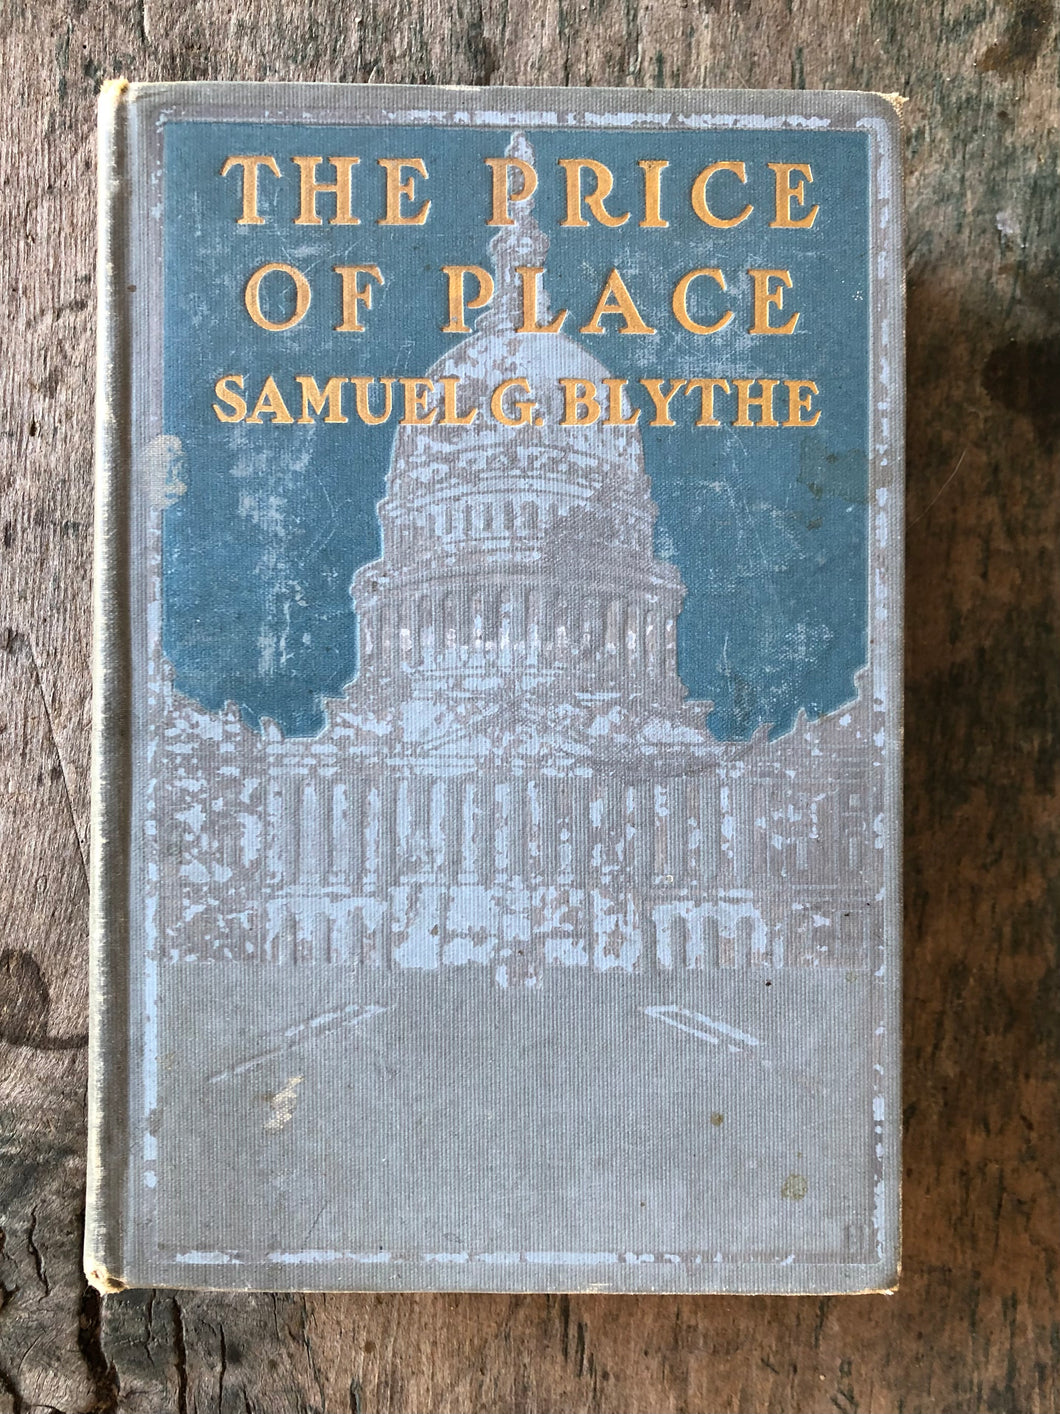 The Price of Place. by Samuel G. Blythe. INSCRIBED BY THE AUTHOR.